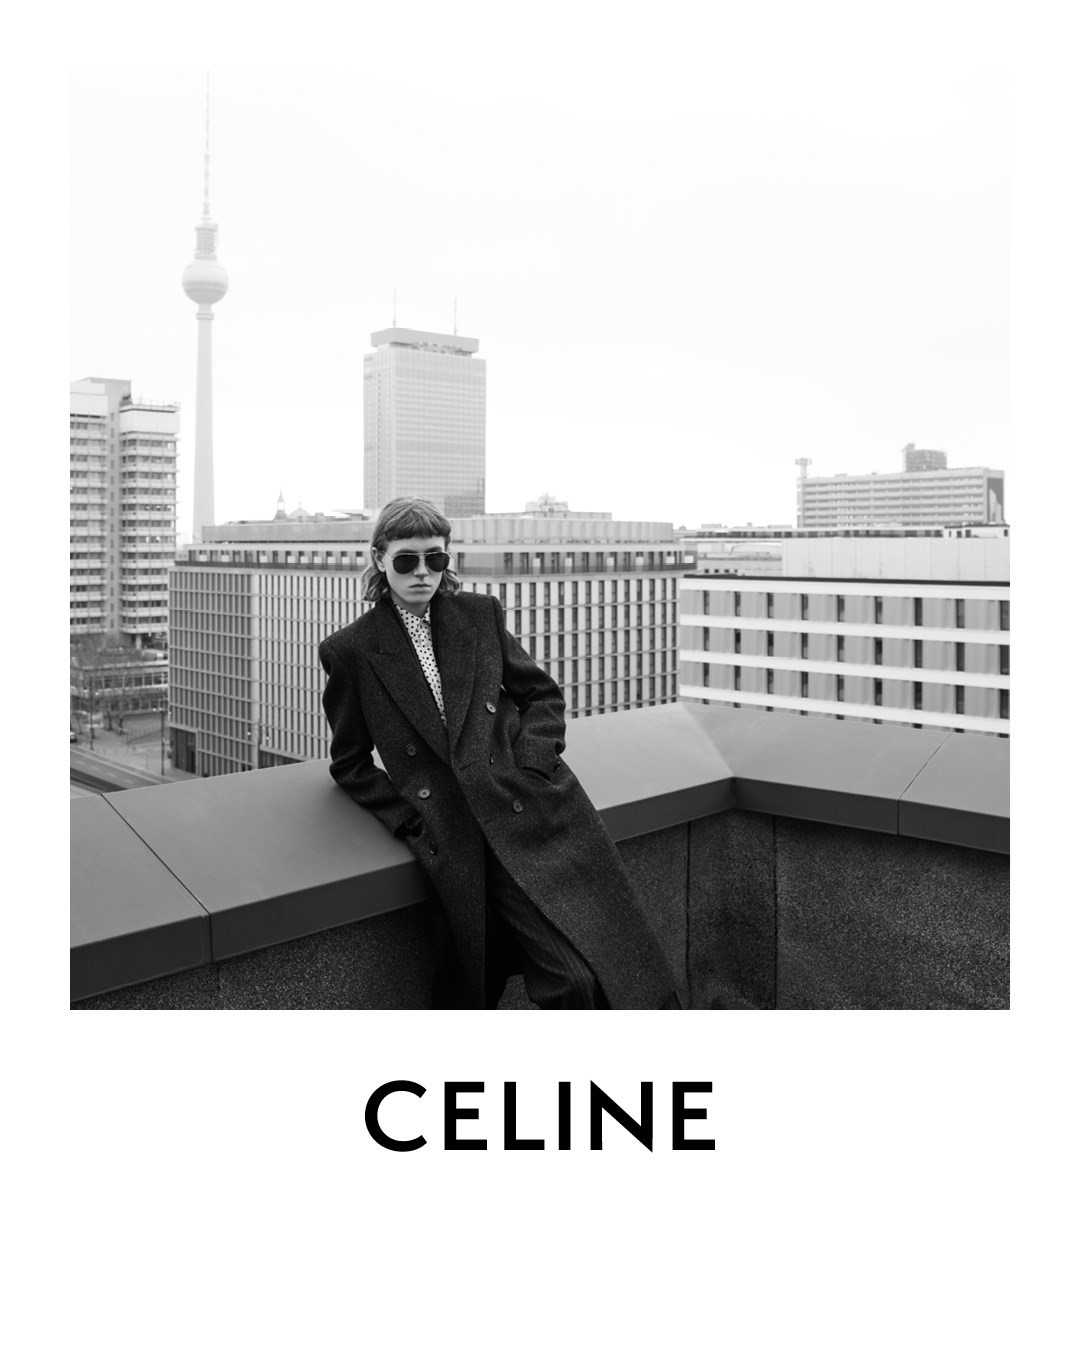 Exclusive: See Celine's New Men's Campaign, Shot by Hedi Slimane 